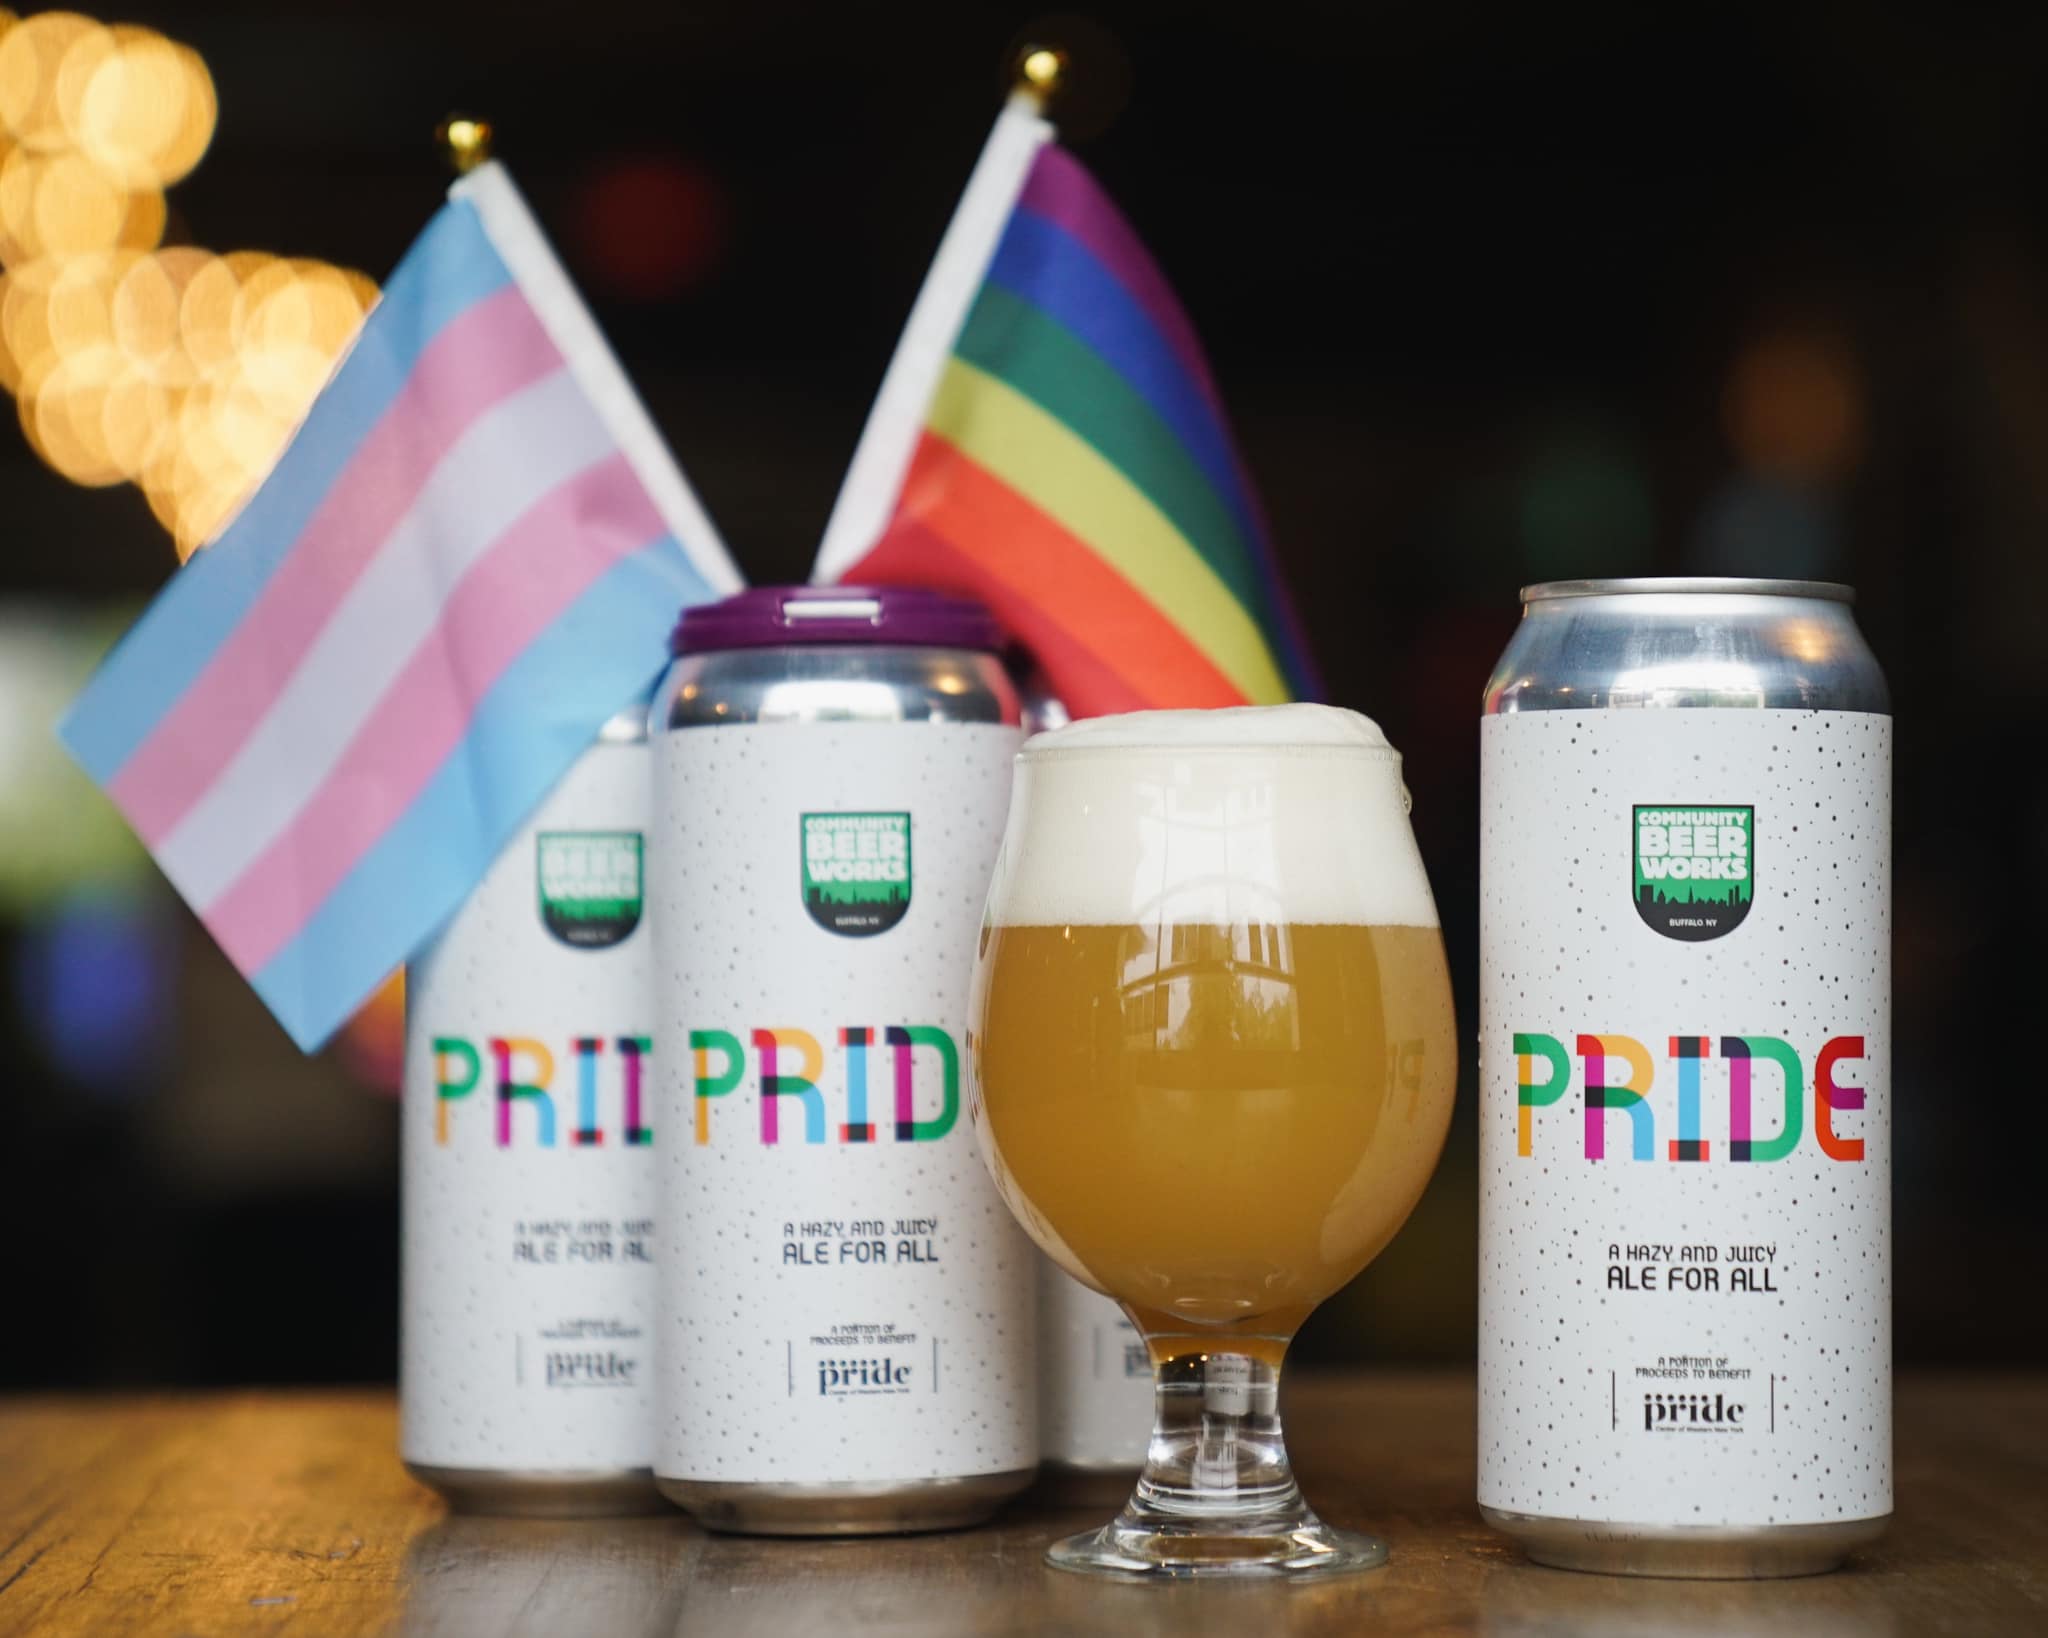 PRIDE Ale (Submitted photo)